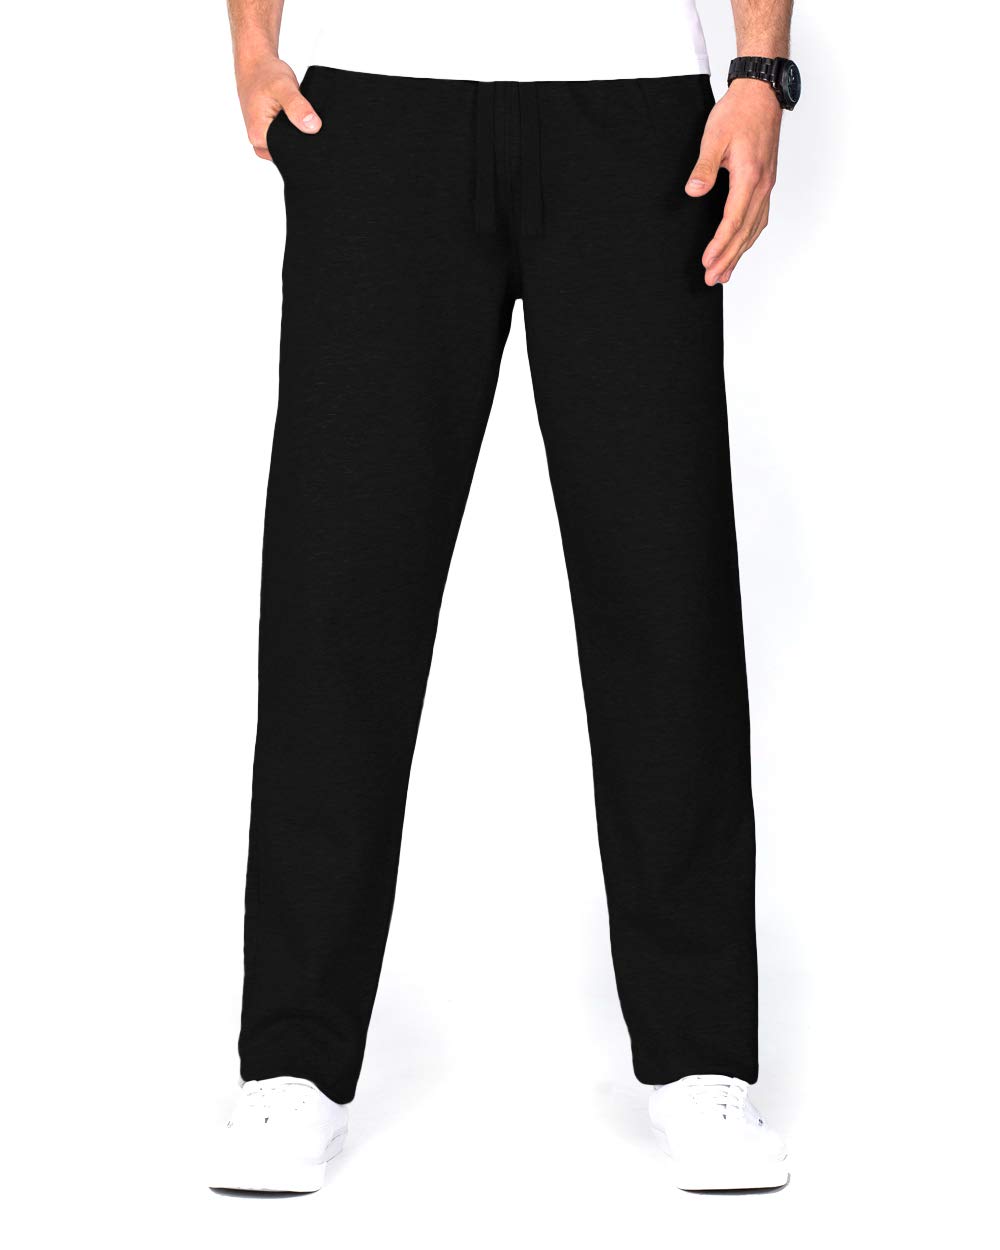 Idtswch 34/36/38 Long Inseam Men's Tall Extra Long Pajama Pants,Lounge  Jogger Yoga Pants,Sleepwear with Pockets for Men, Black, S/32inseam :  : Clothing, Shoes & Accessories